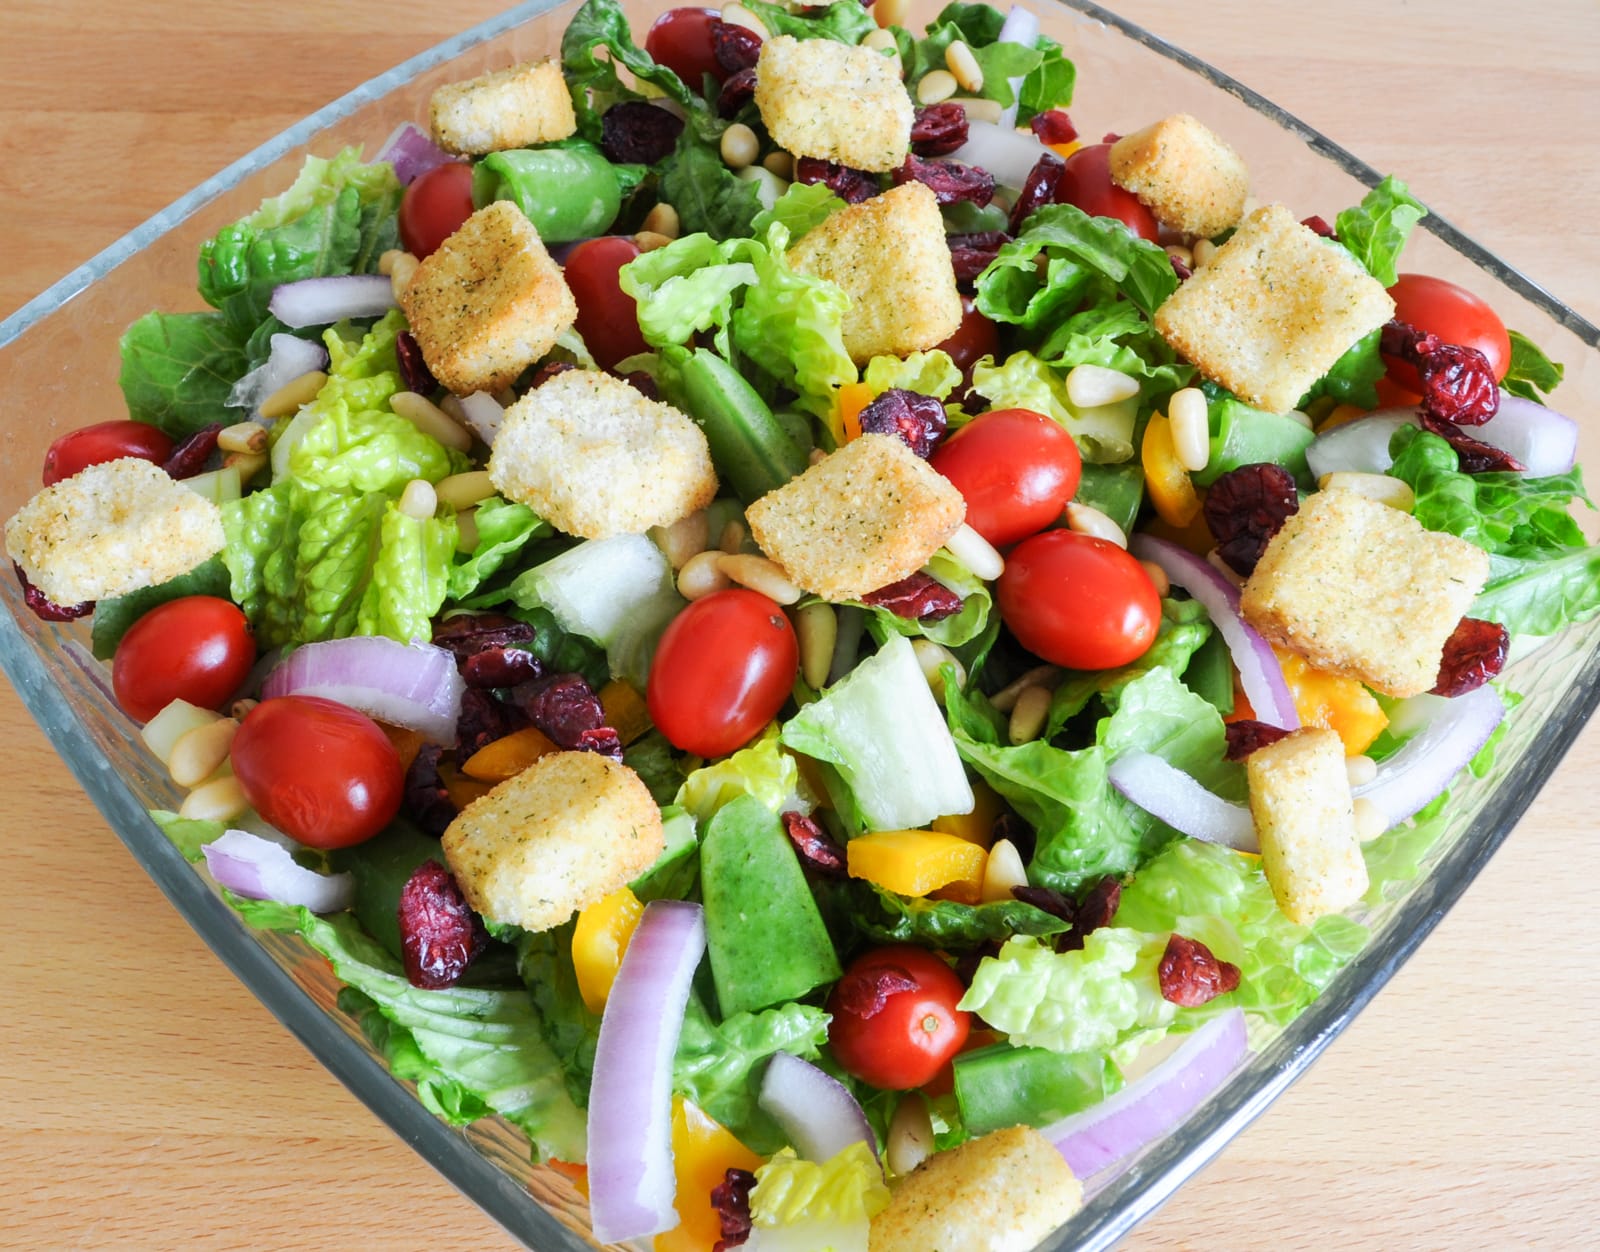 Vegetable Loaded Salad with Creamy Dill Dressing